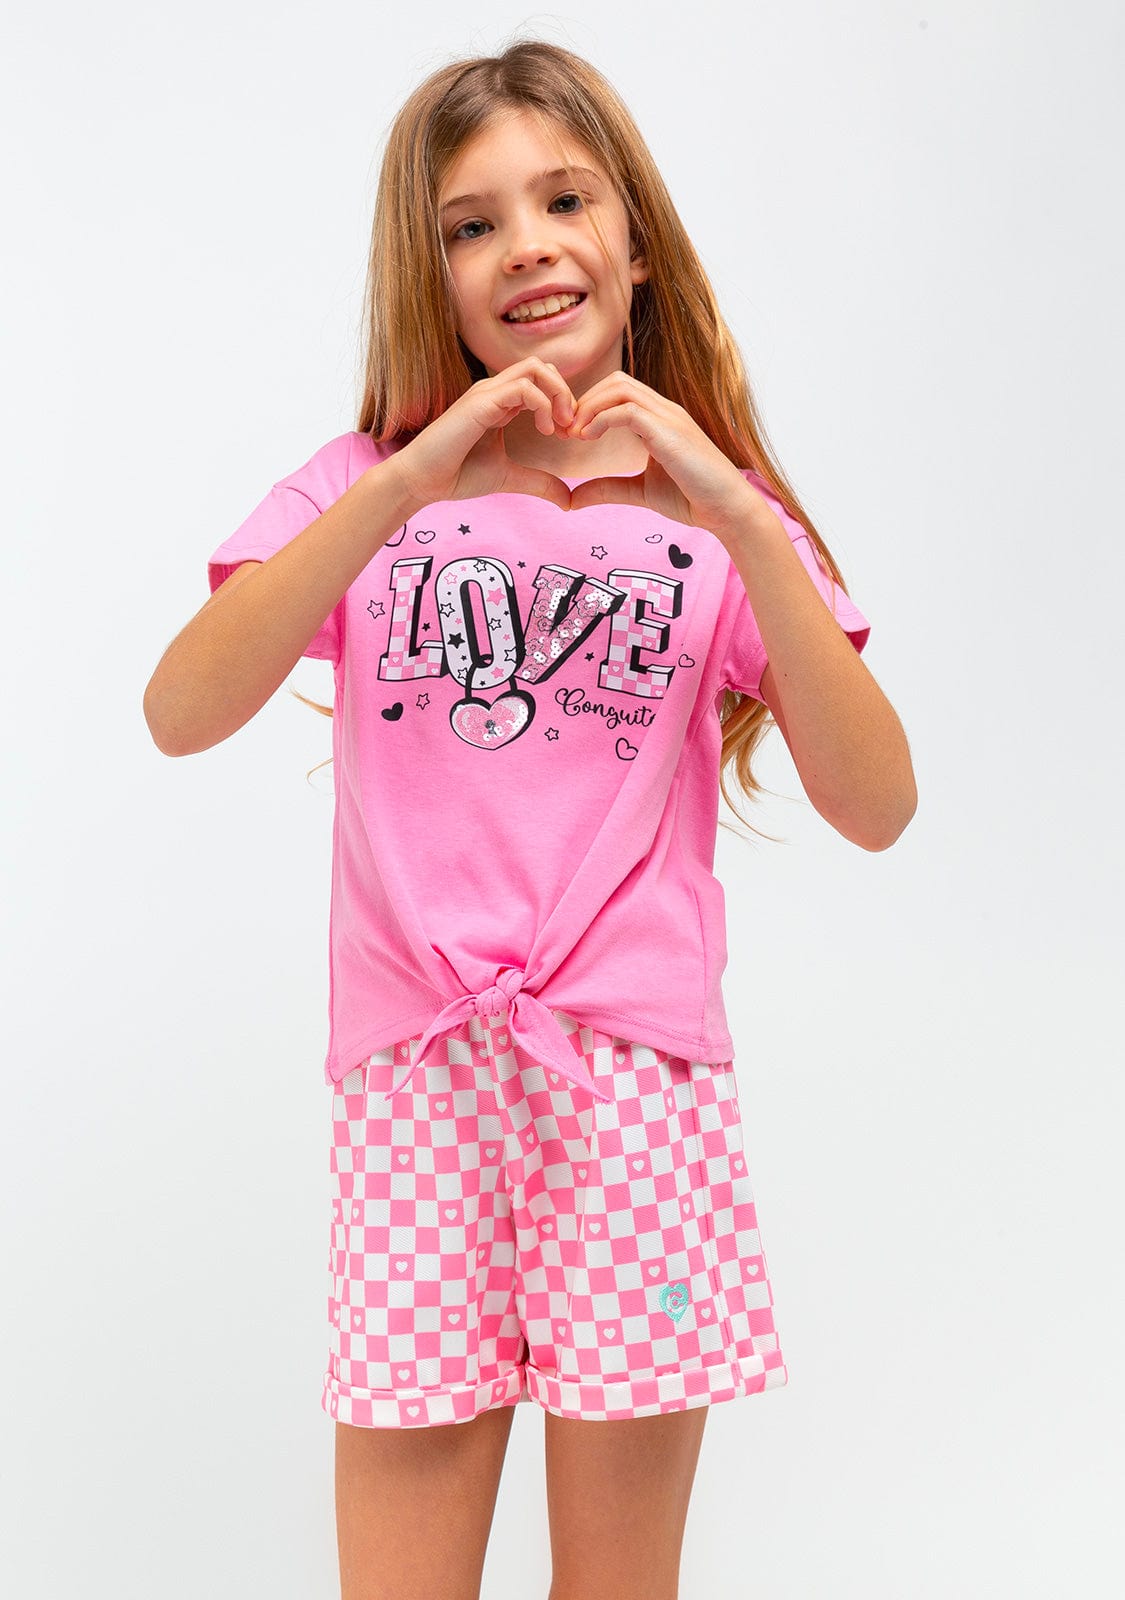 CONGUITOS TEXTIL Clothing Girl´s Pink Checkers Shorts